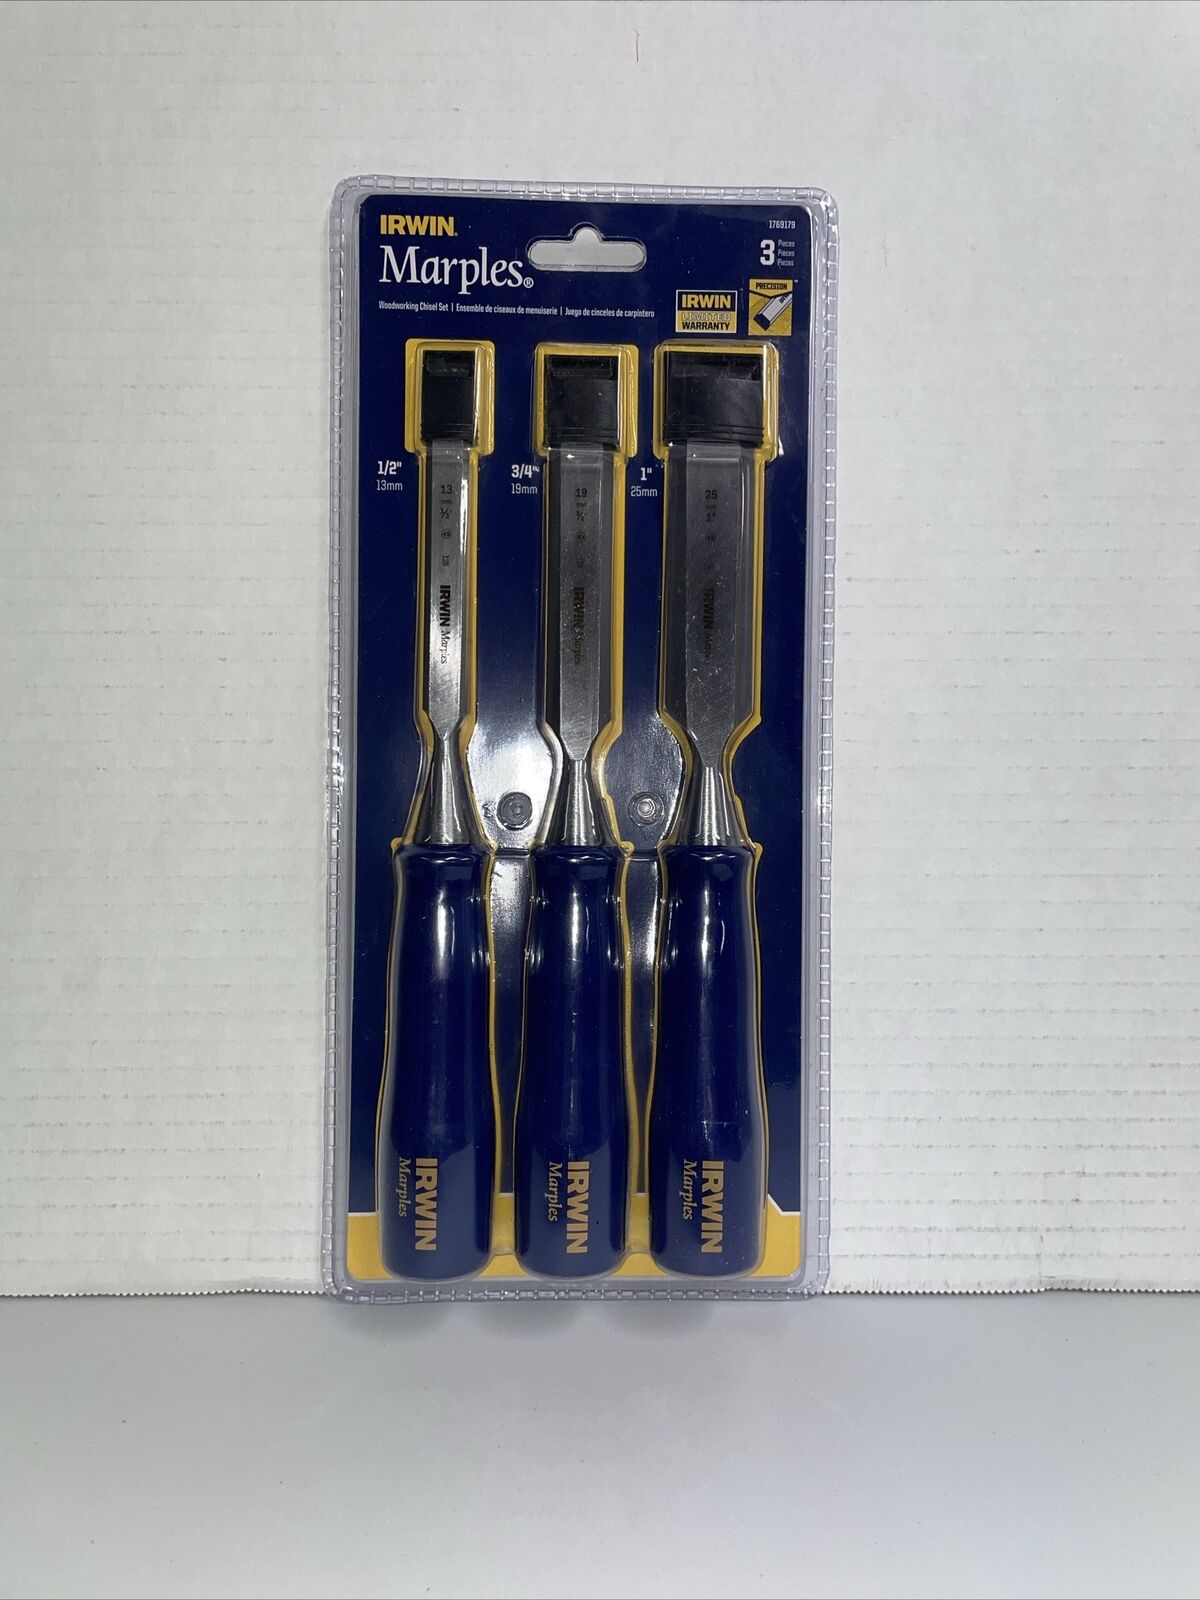 IRWIN Marples 3 Piece Woodworking Chisel Set - 1769179 - New in package